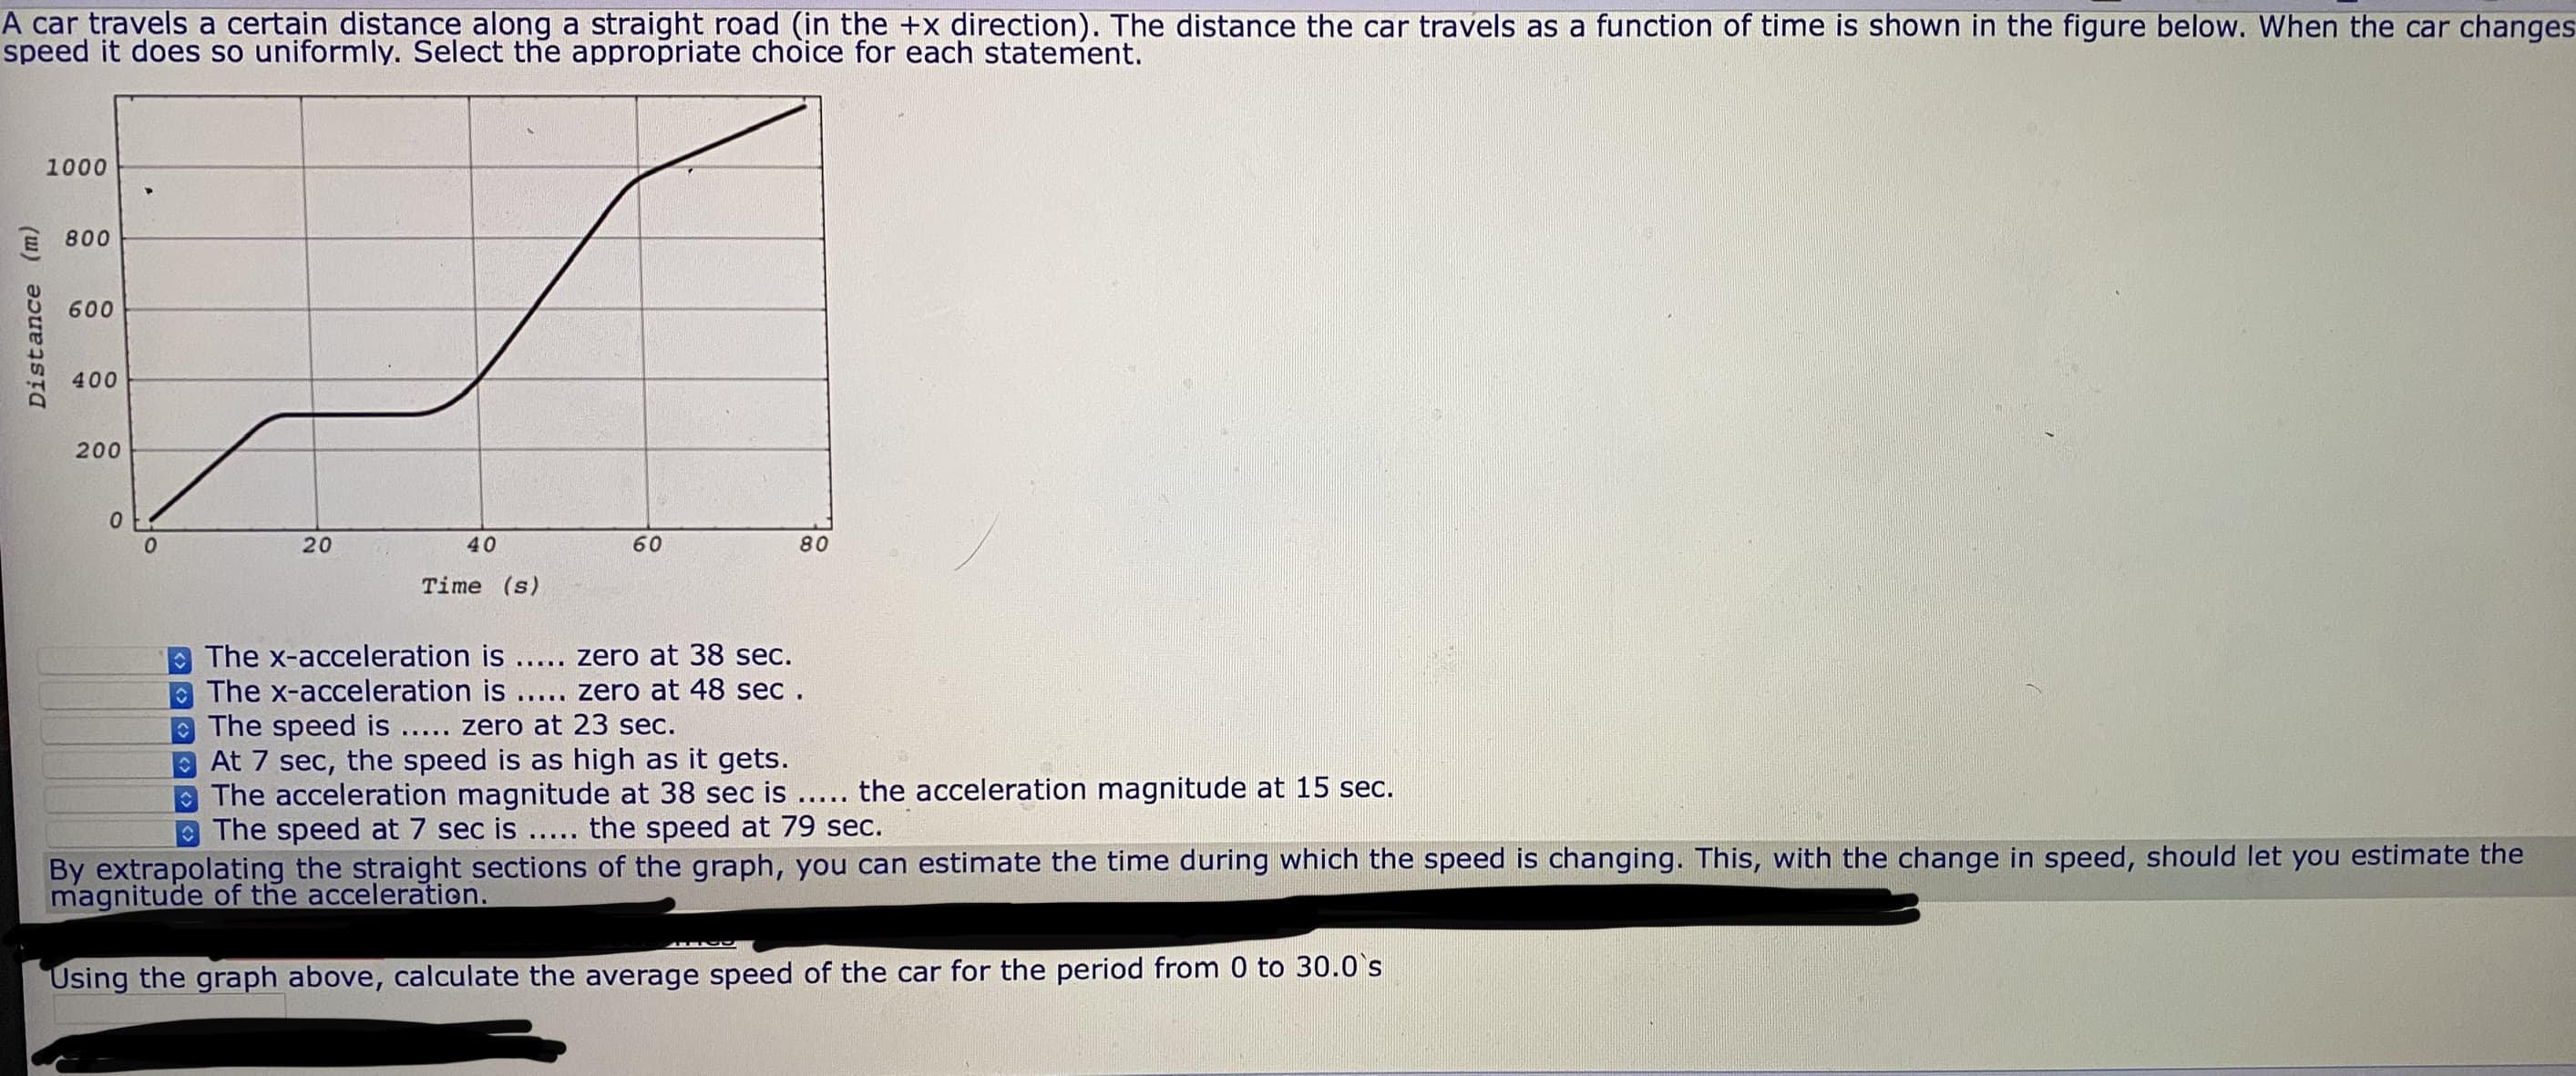 Using the graph above, calculate the average speed of the car for the period from 0 to 30.0's
